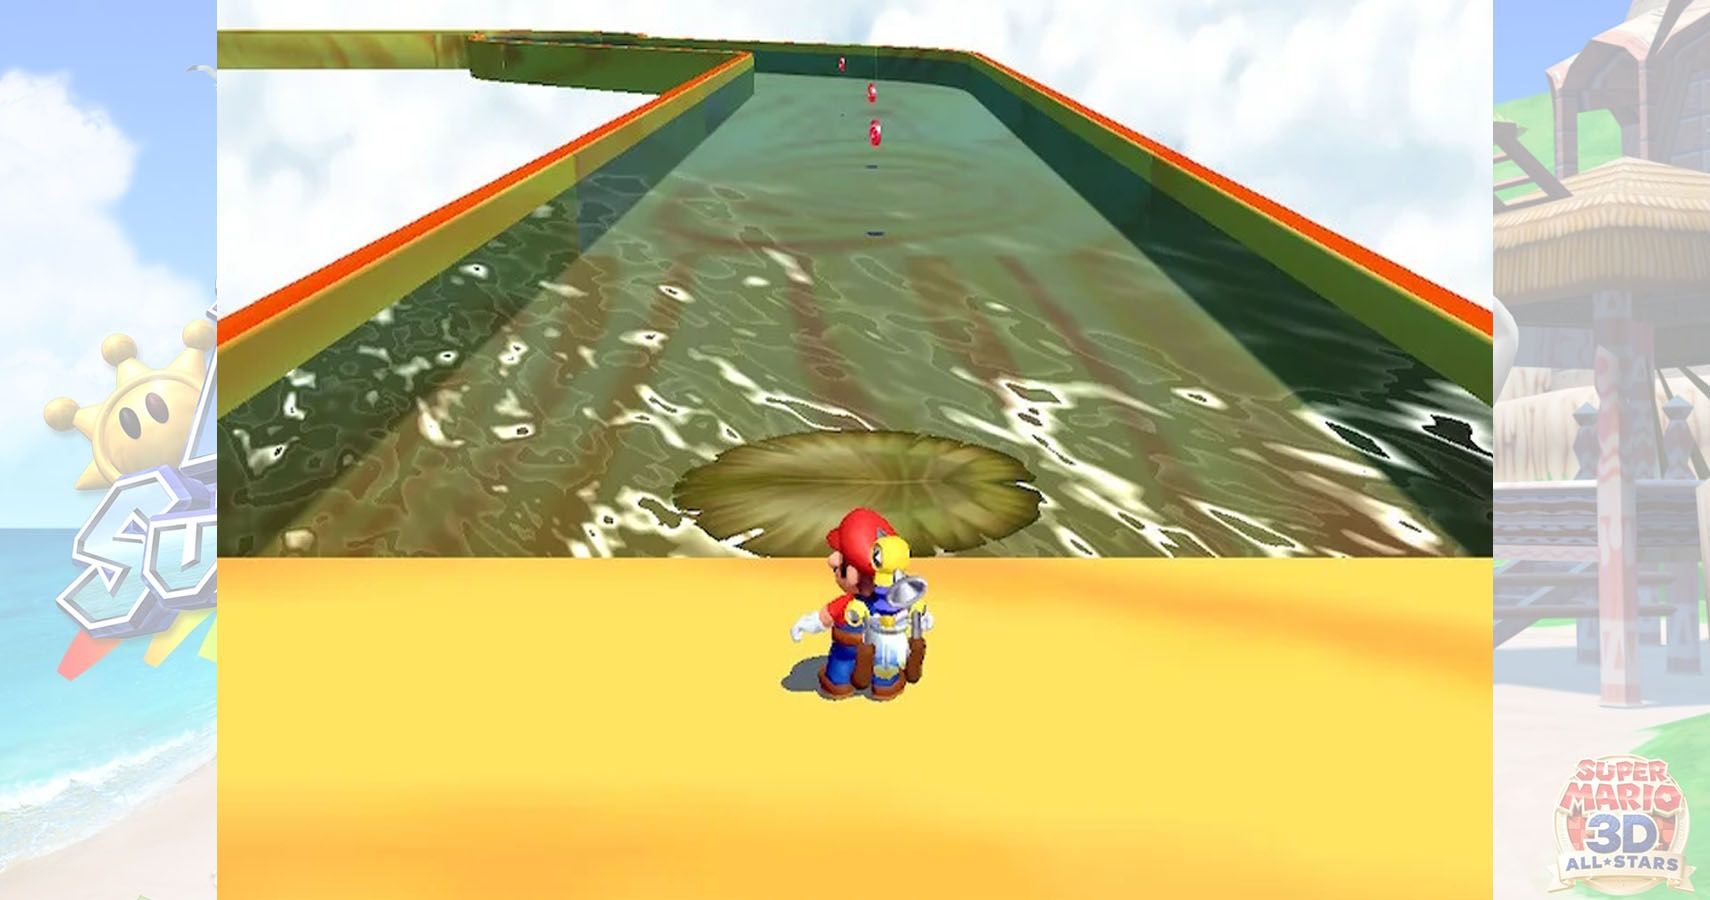 Mario about to jump onto lily pad and collect coins in poisonous river in super mario sunshine.